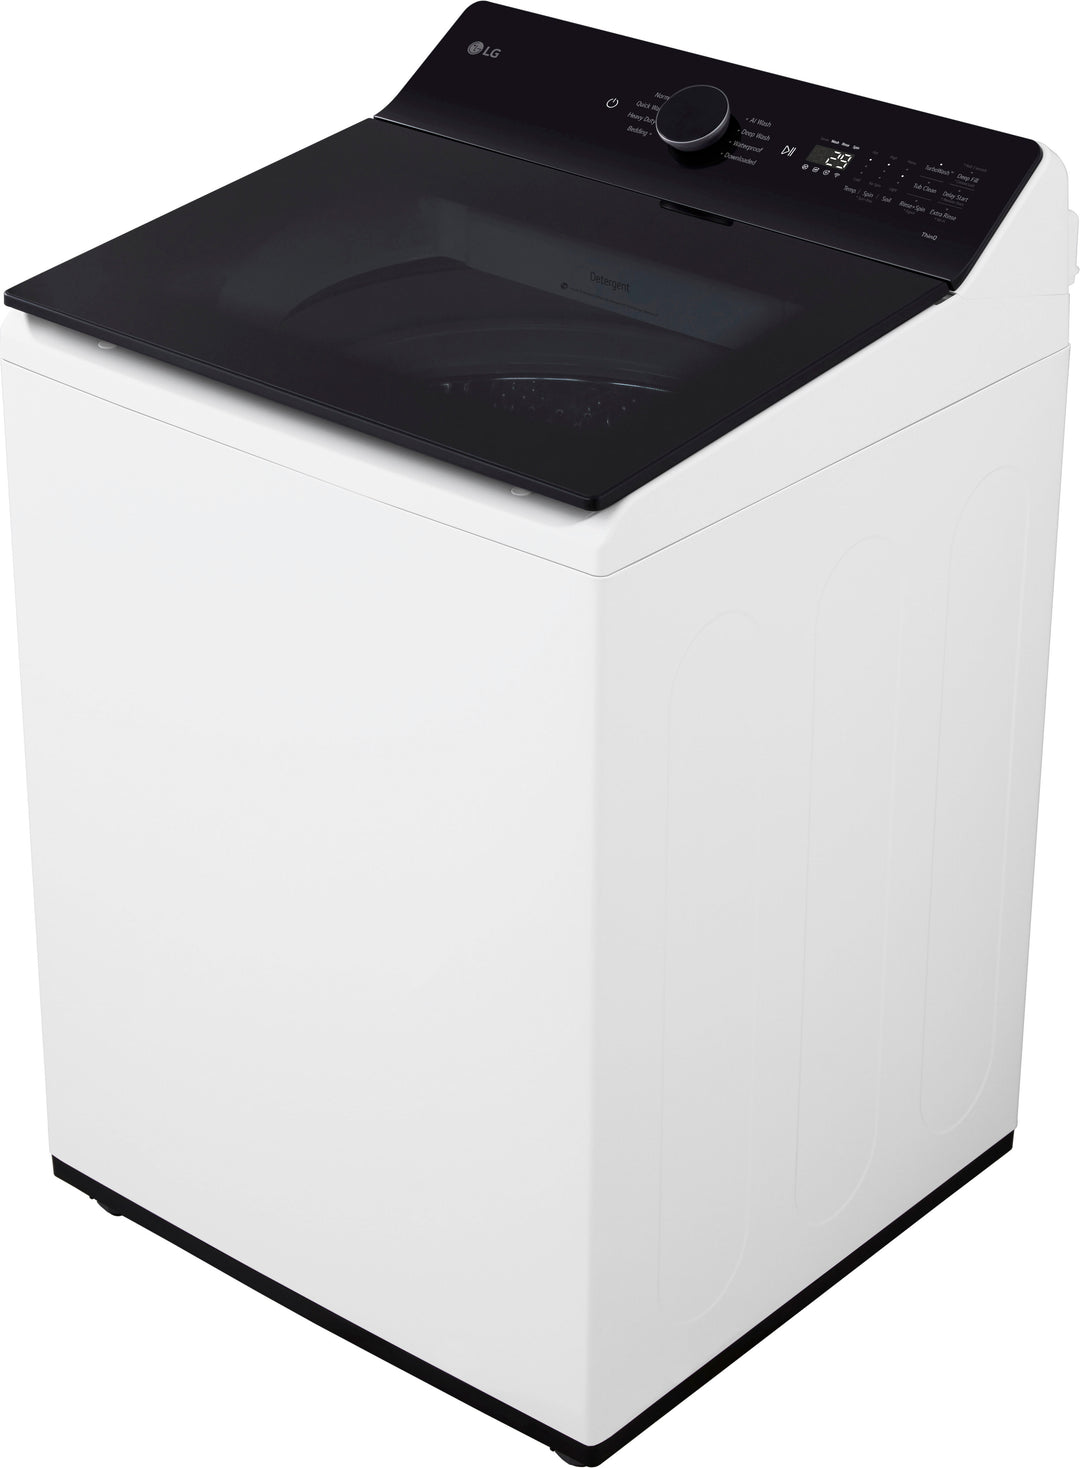 LG - 5.5 Cu. Ft. High Efficiency Smart Top Load Washer with EasyUnload - Alpine White_6